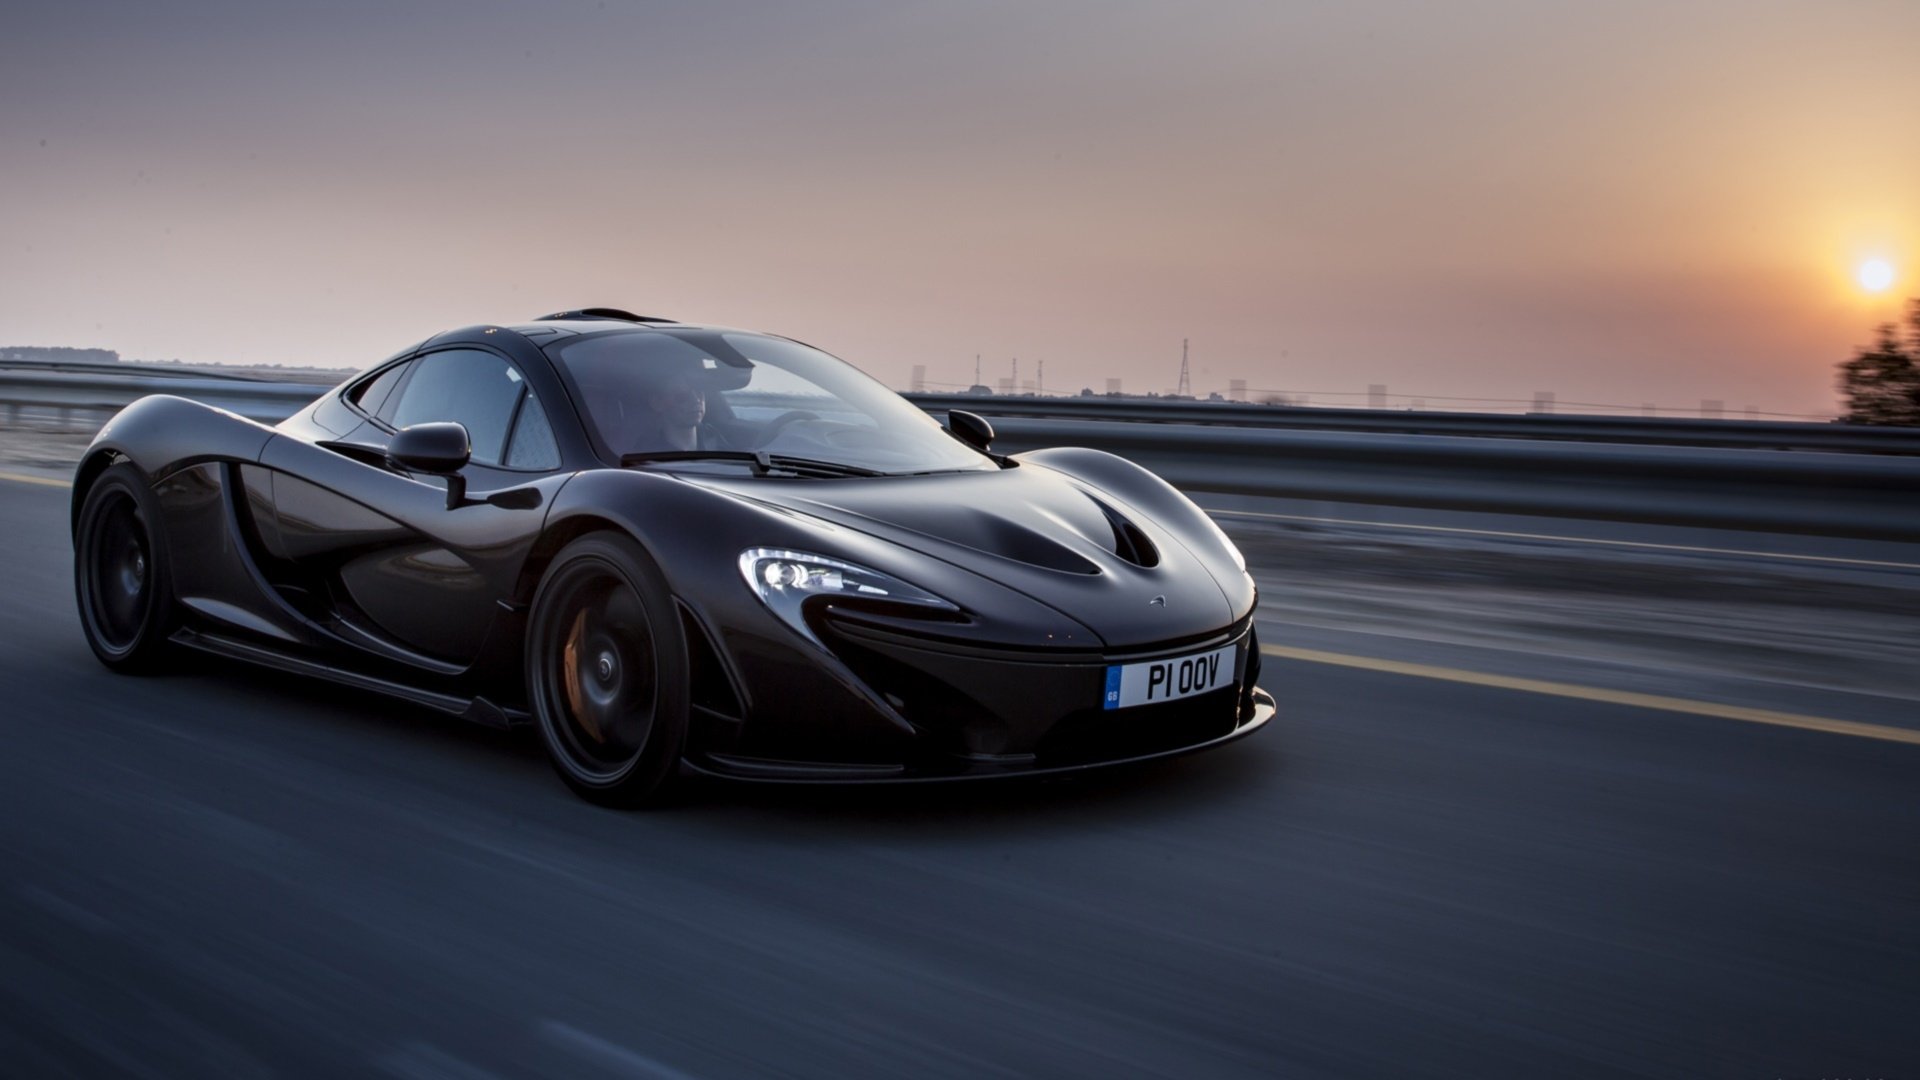 McLaren P1 Full HD Wallpaper and Background Image | 1920x1080 | ID:494661